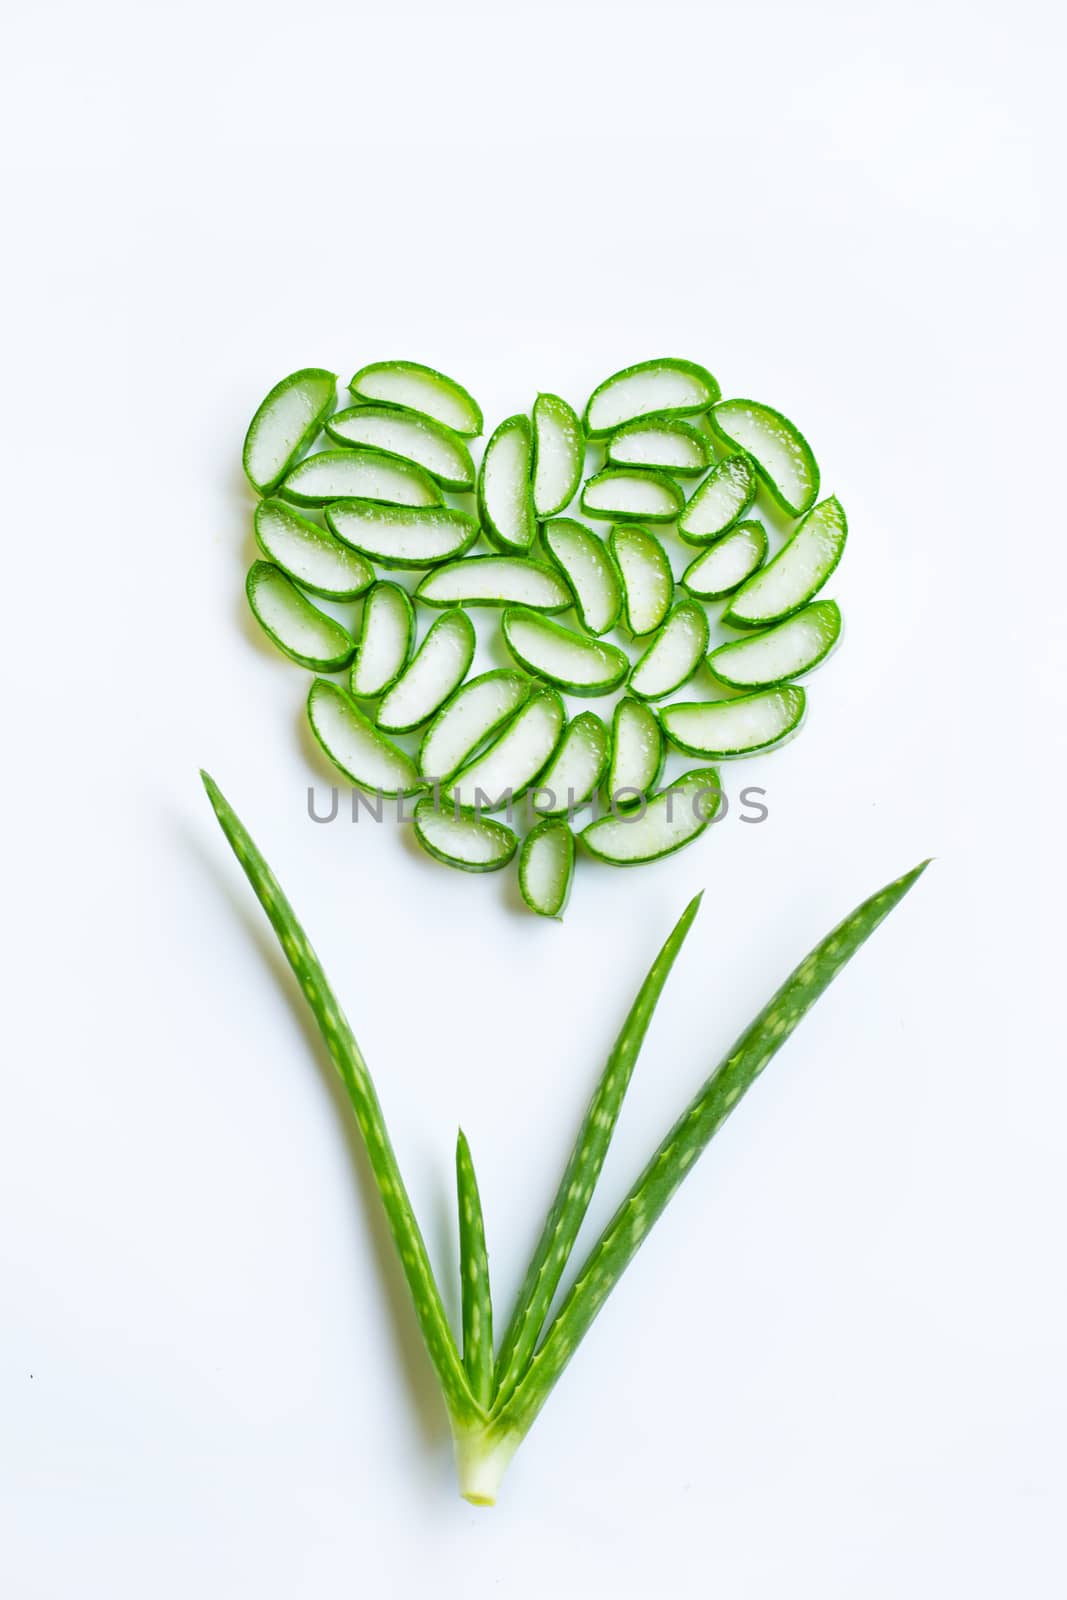 Aloe vera with slices heart shaped on white background by Bowonpat